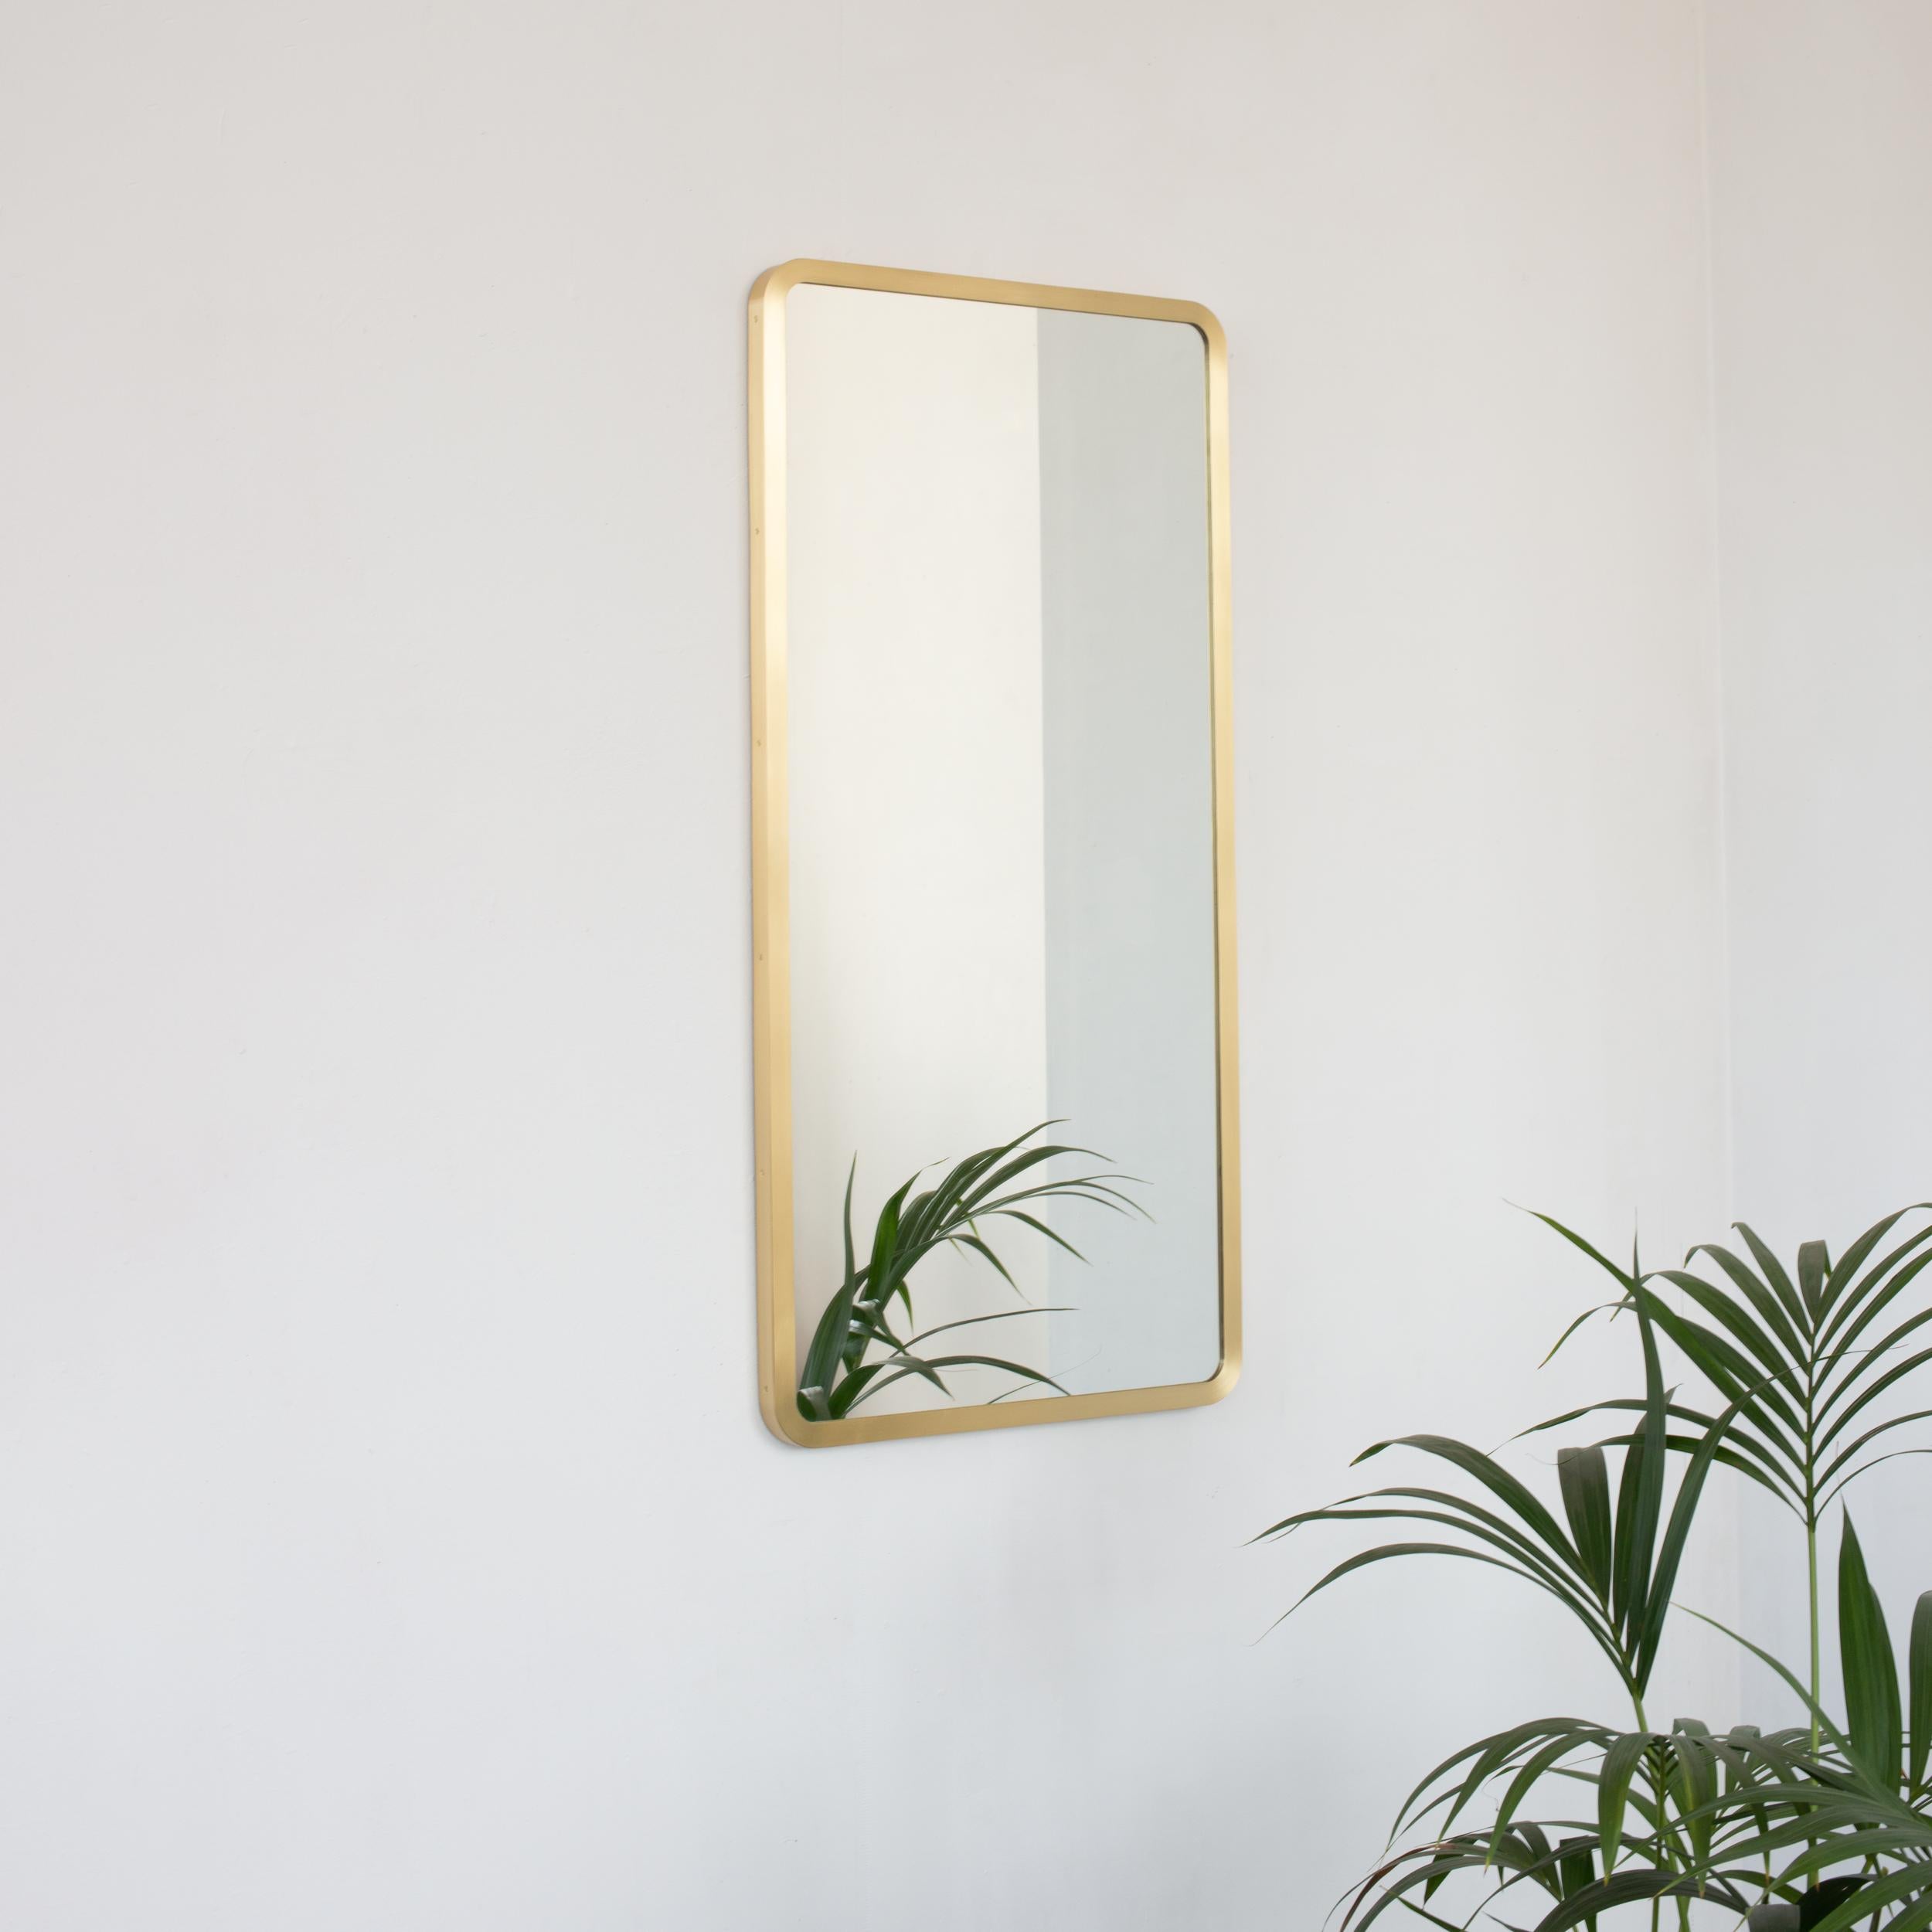 Modern rectangular mirror with an elegant solid brushed brass frame.  Part of the charming Quadris™ collection, designed and handcrafted in London, UK. 

Our brand new 'Full Frame' design maintains the chic and elegant style of Alguacil & Perkoff'